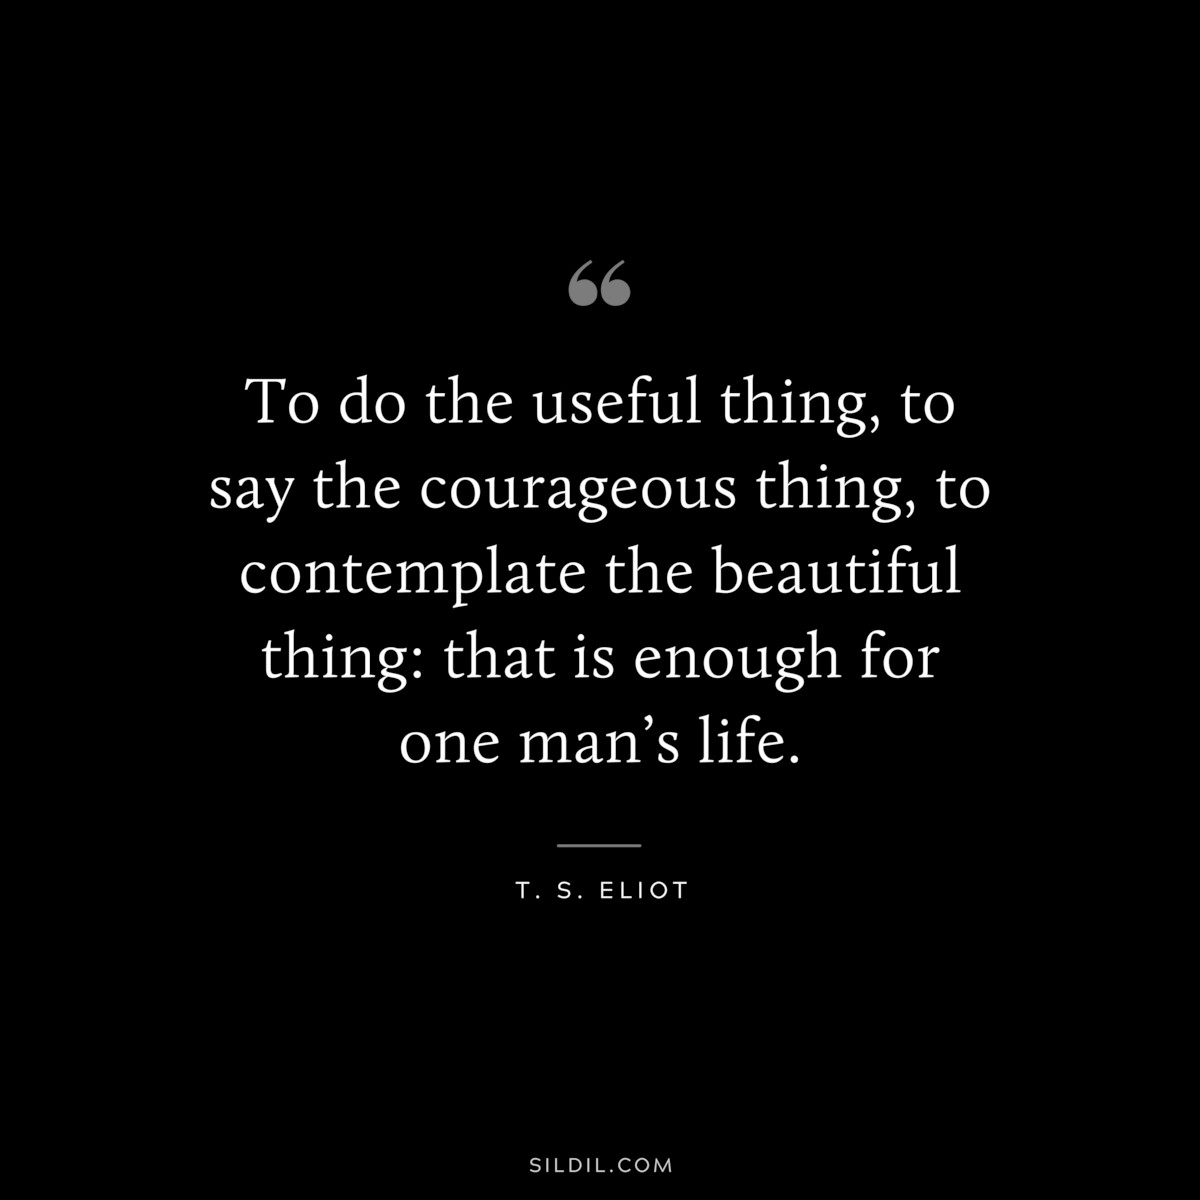 To do the useful thing, to say the courageous thing, to contemplate the beautiful thing: that is enough for one man’s life. ― T. S. Eliot